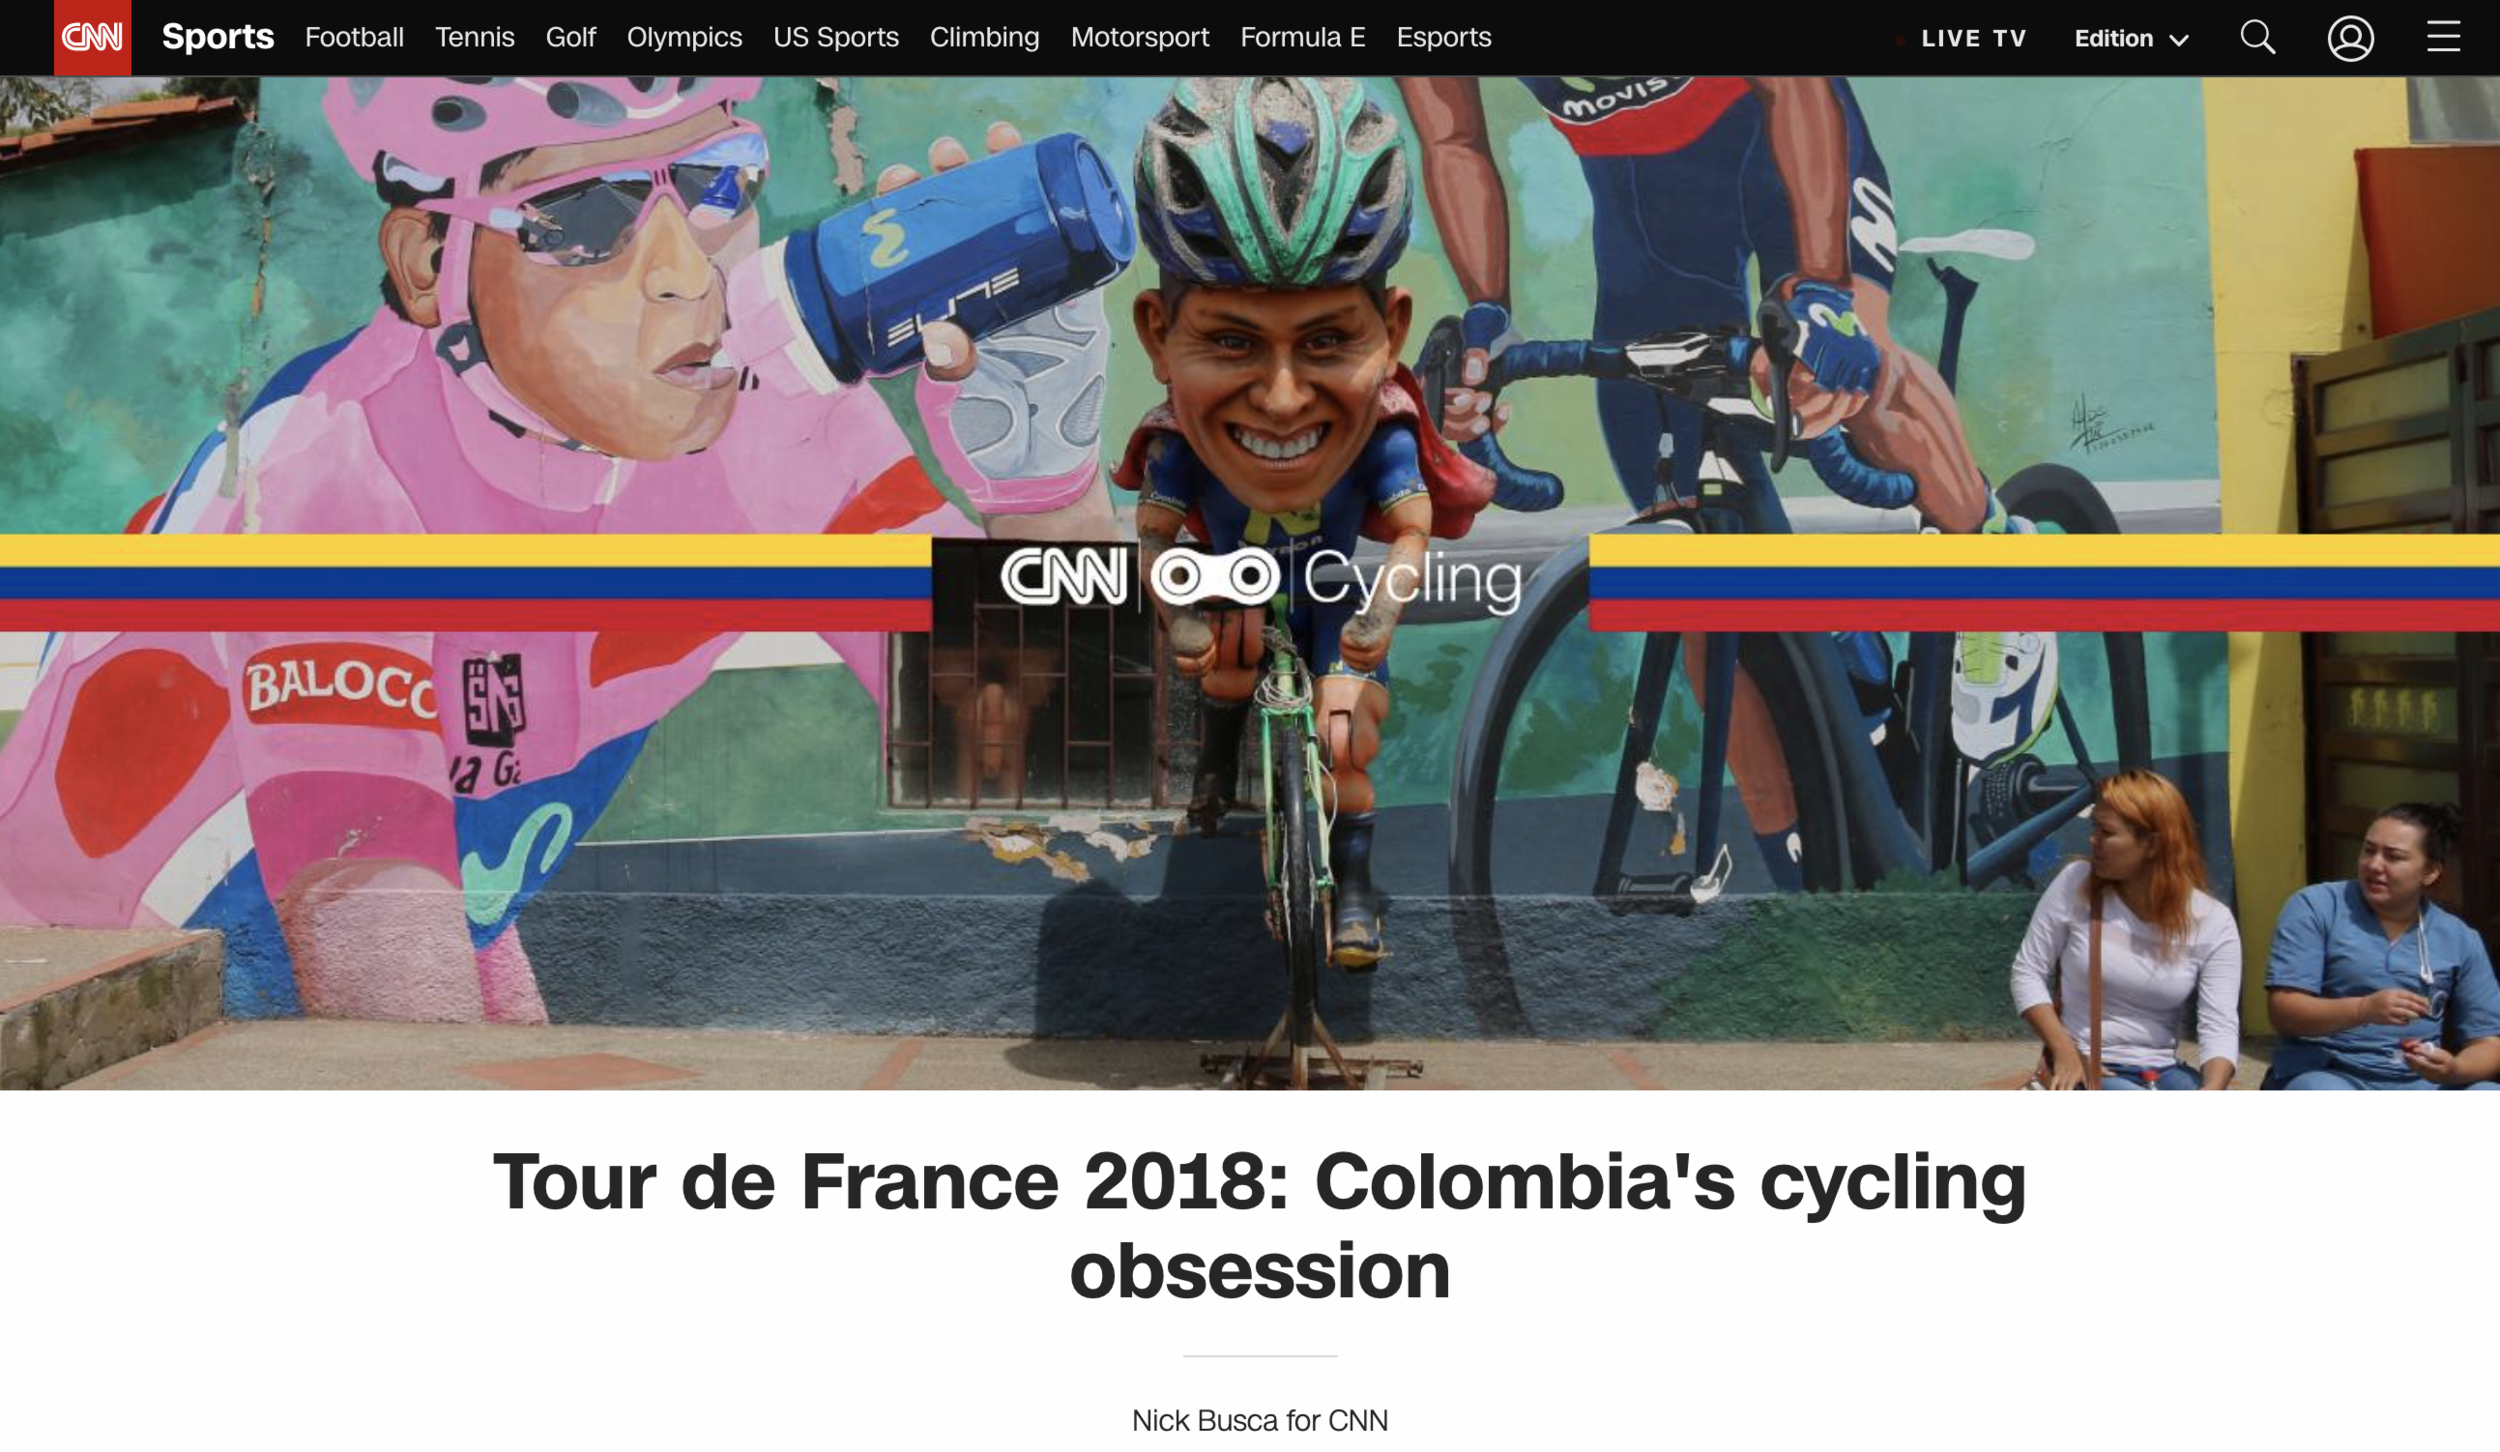 Tour de France 2018: Colombia's cycling obsession